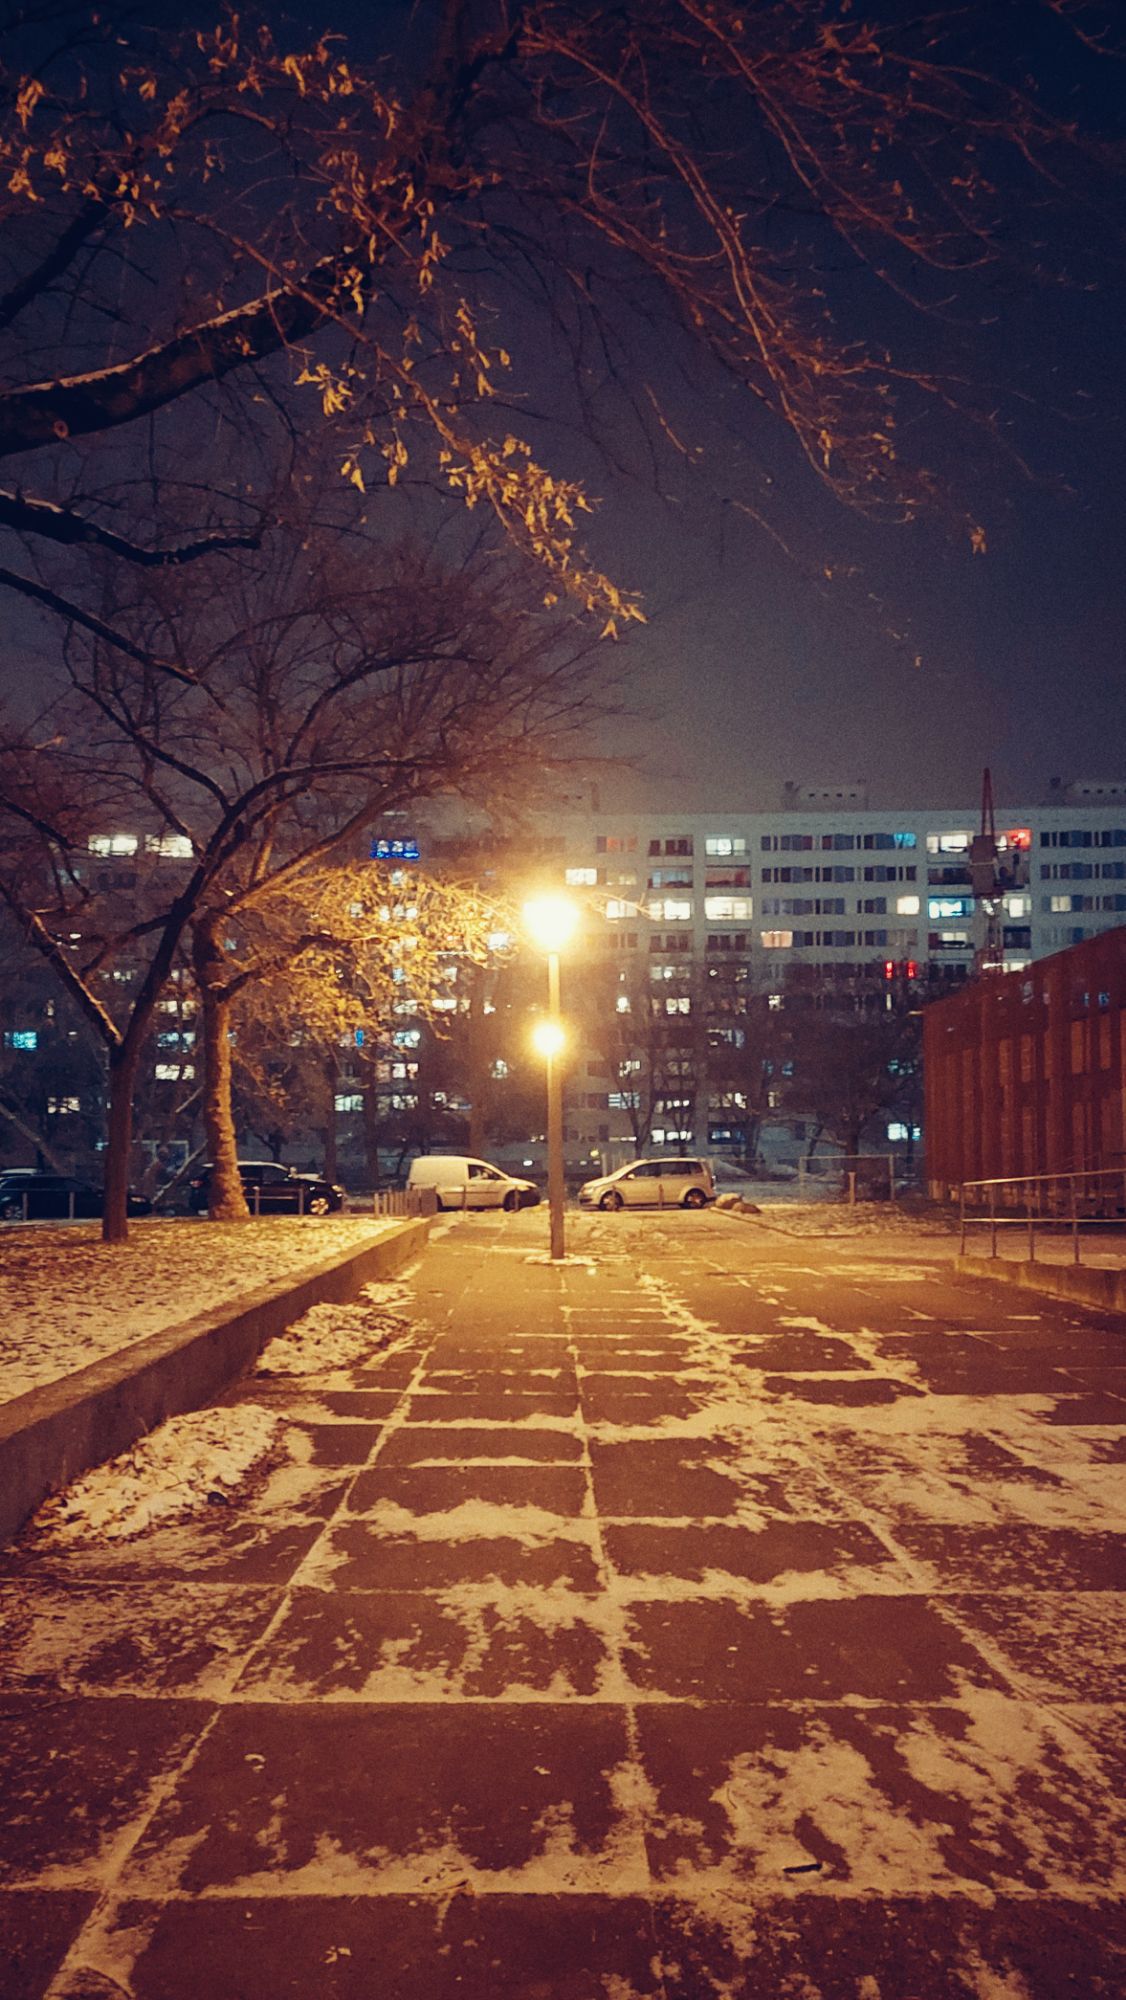 An empty passage between houses. Streetlights in a line. Some snow on the ground. Distant high-rises, and some parked cars.